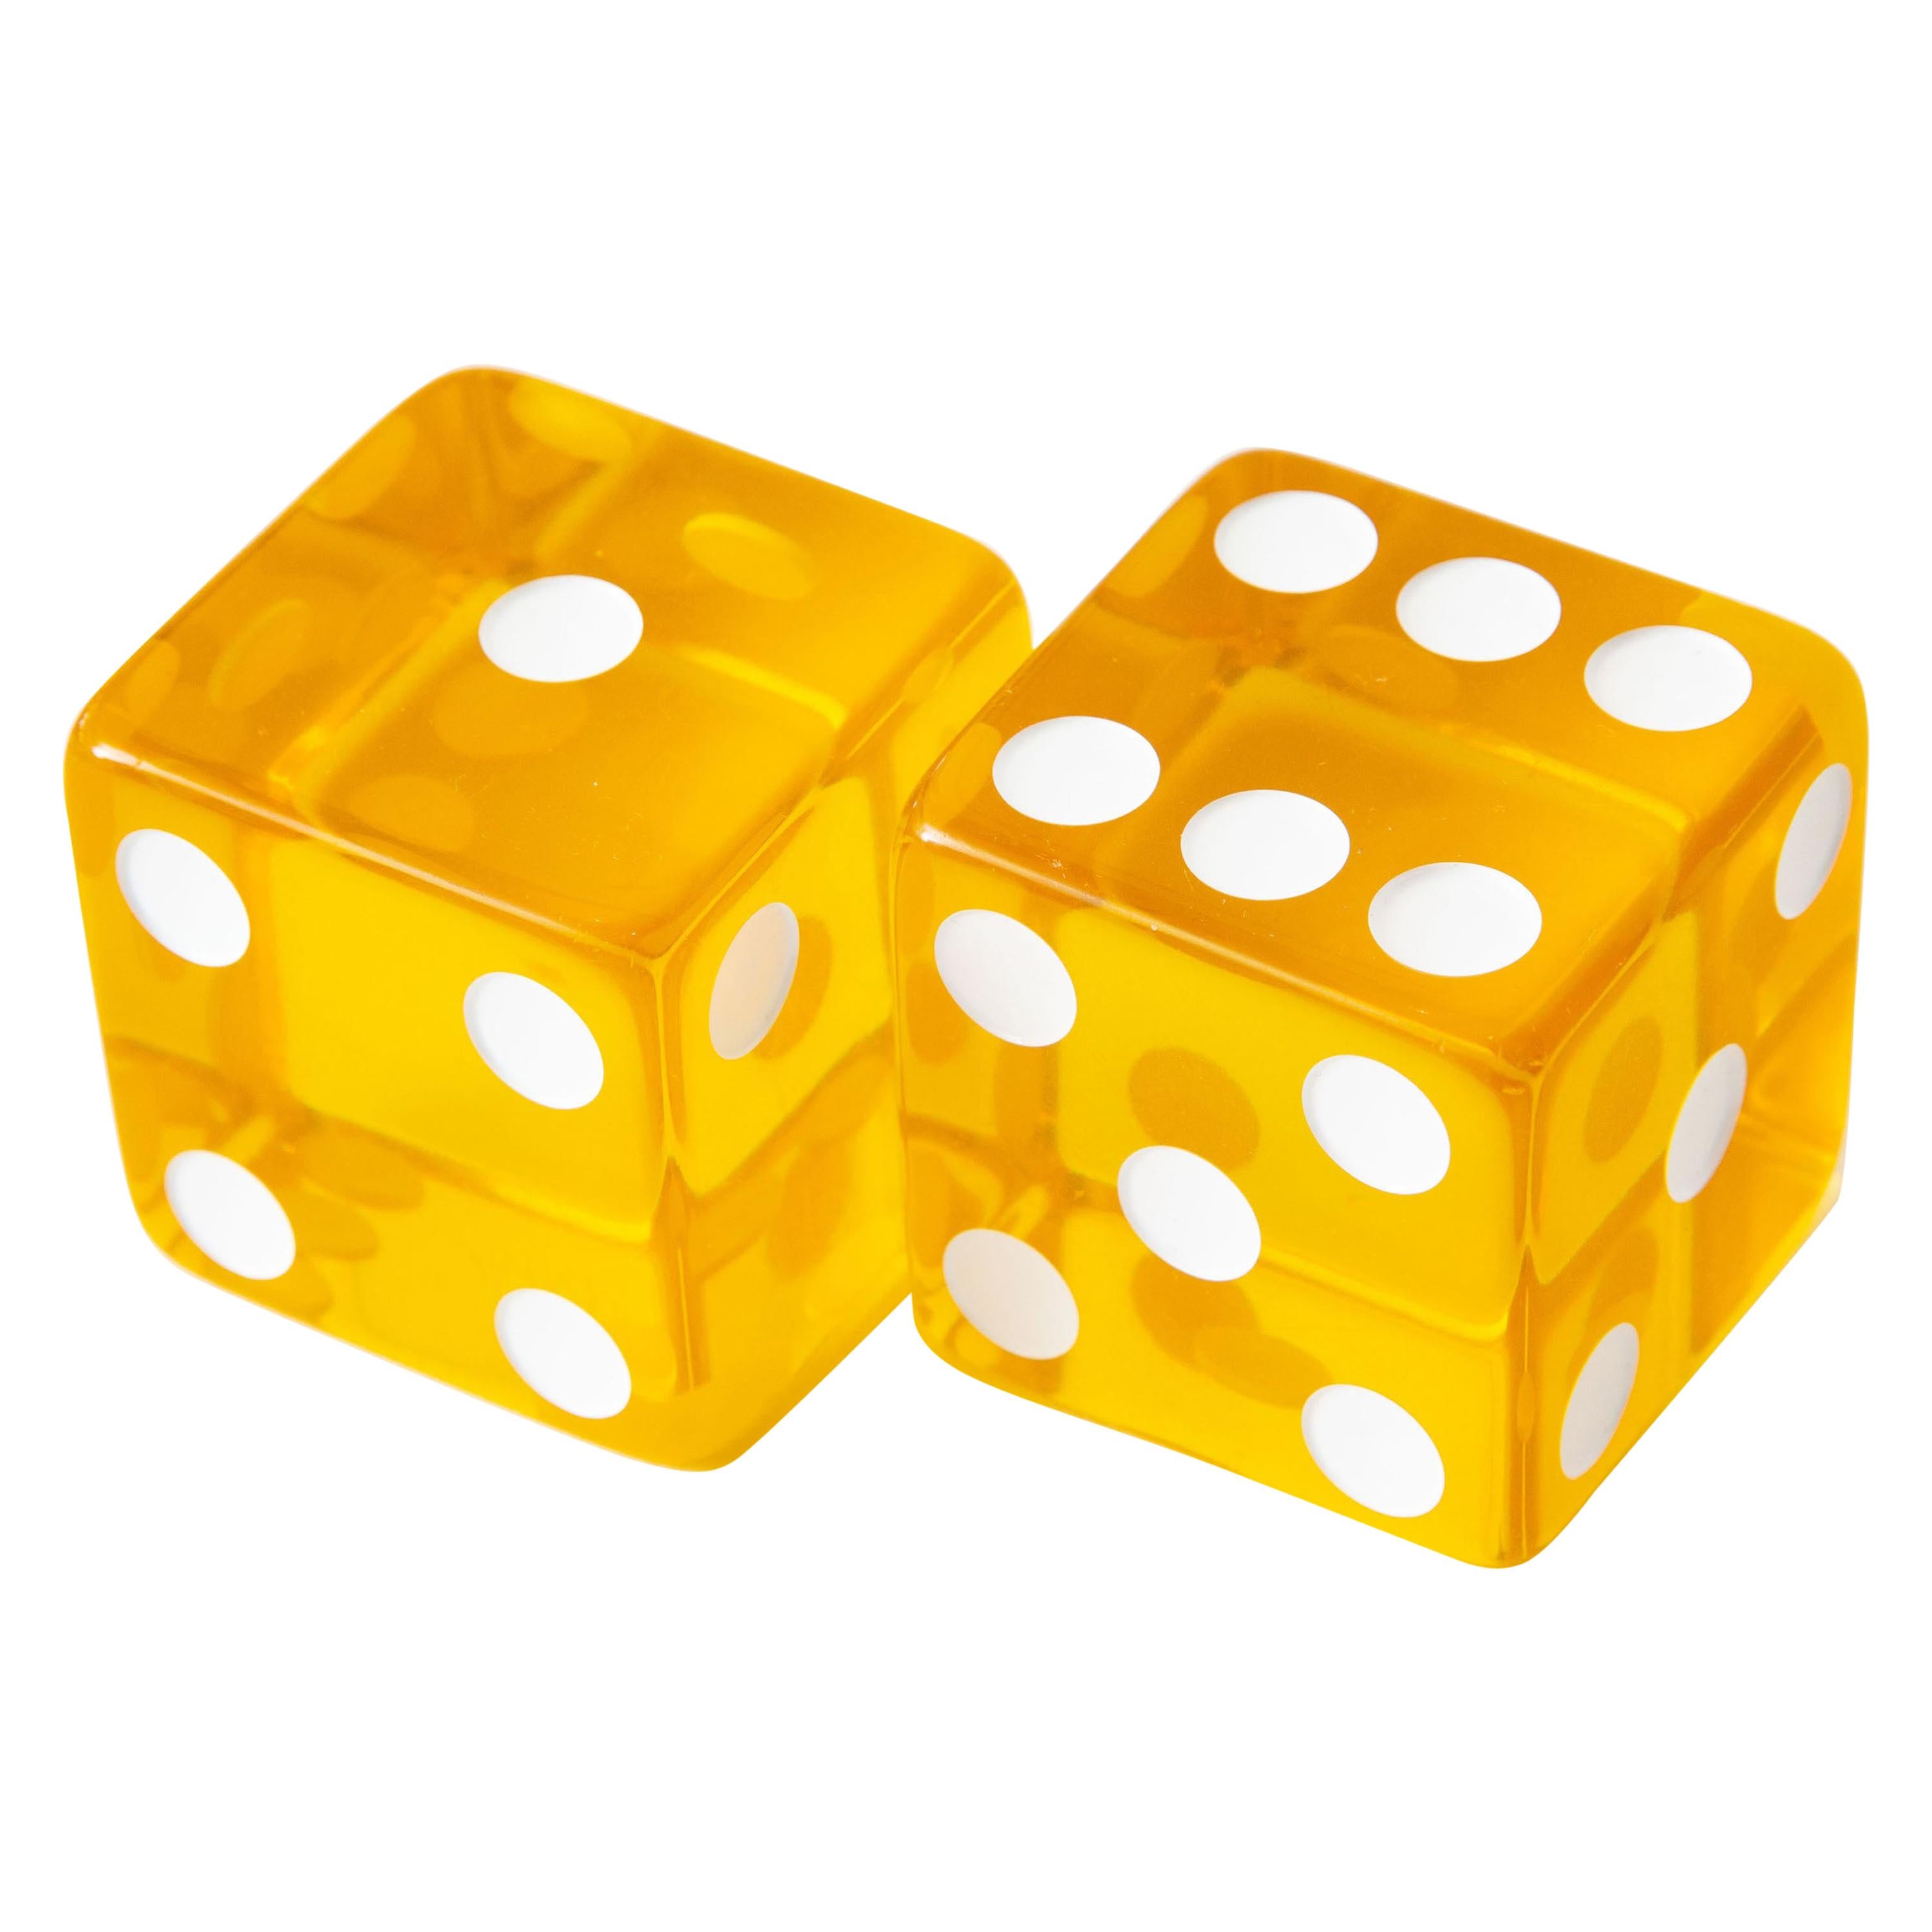  Lucite Yellow and White Square Dice Sculptures Vintage Pair Of